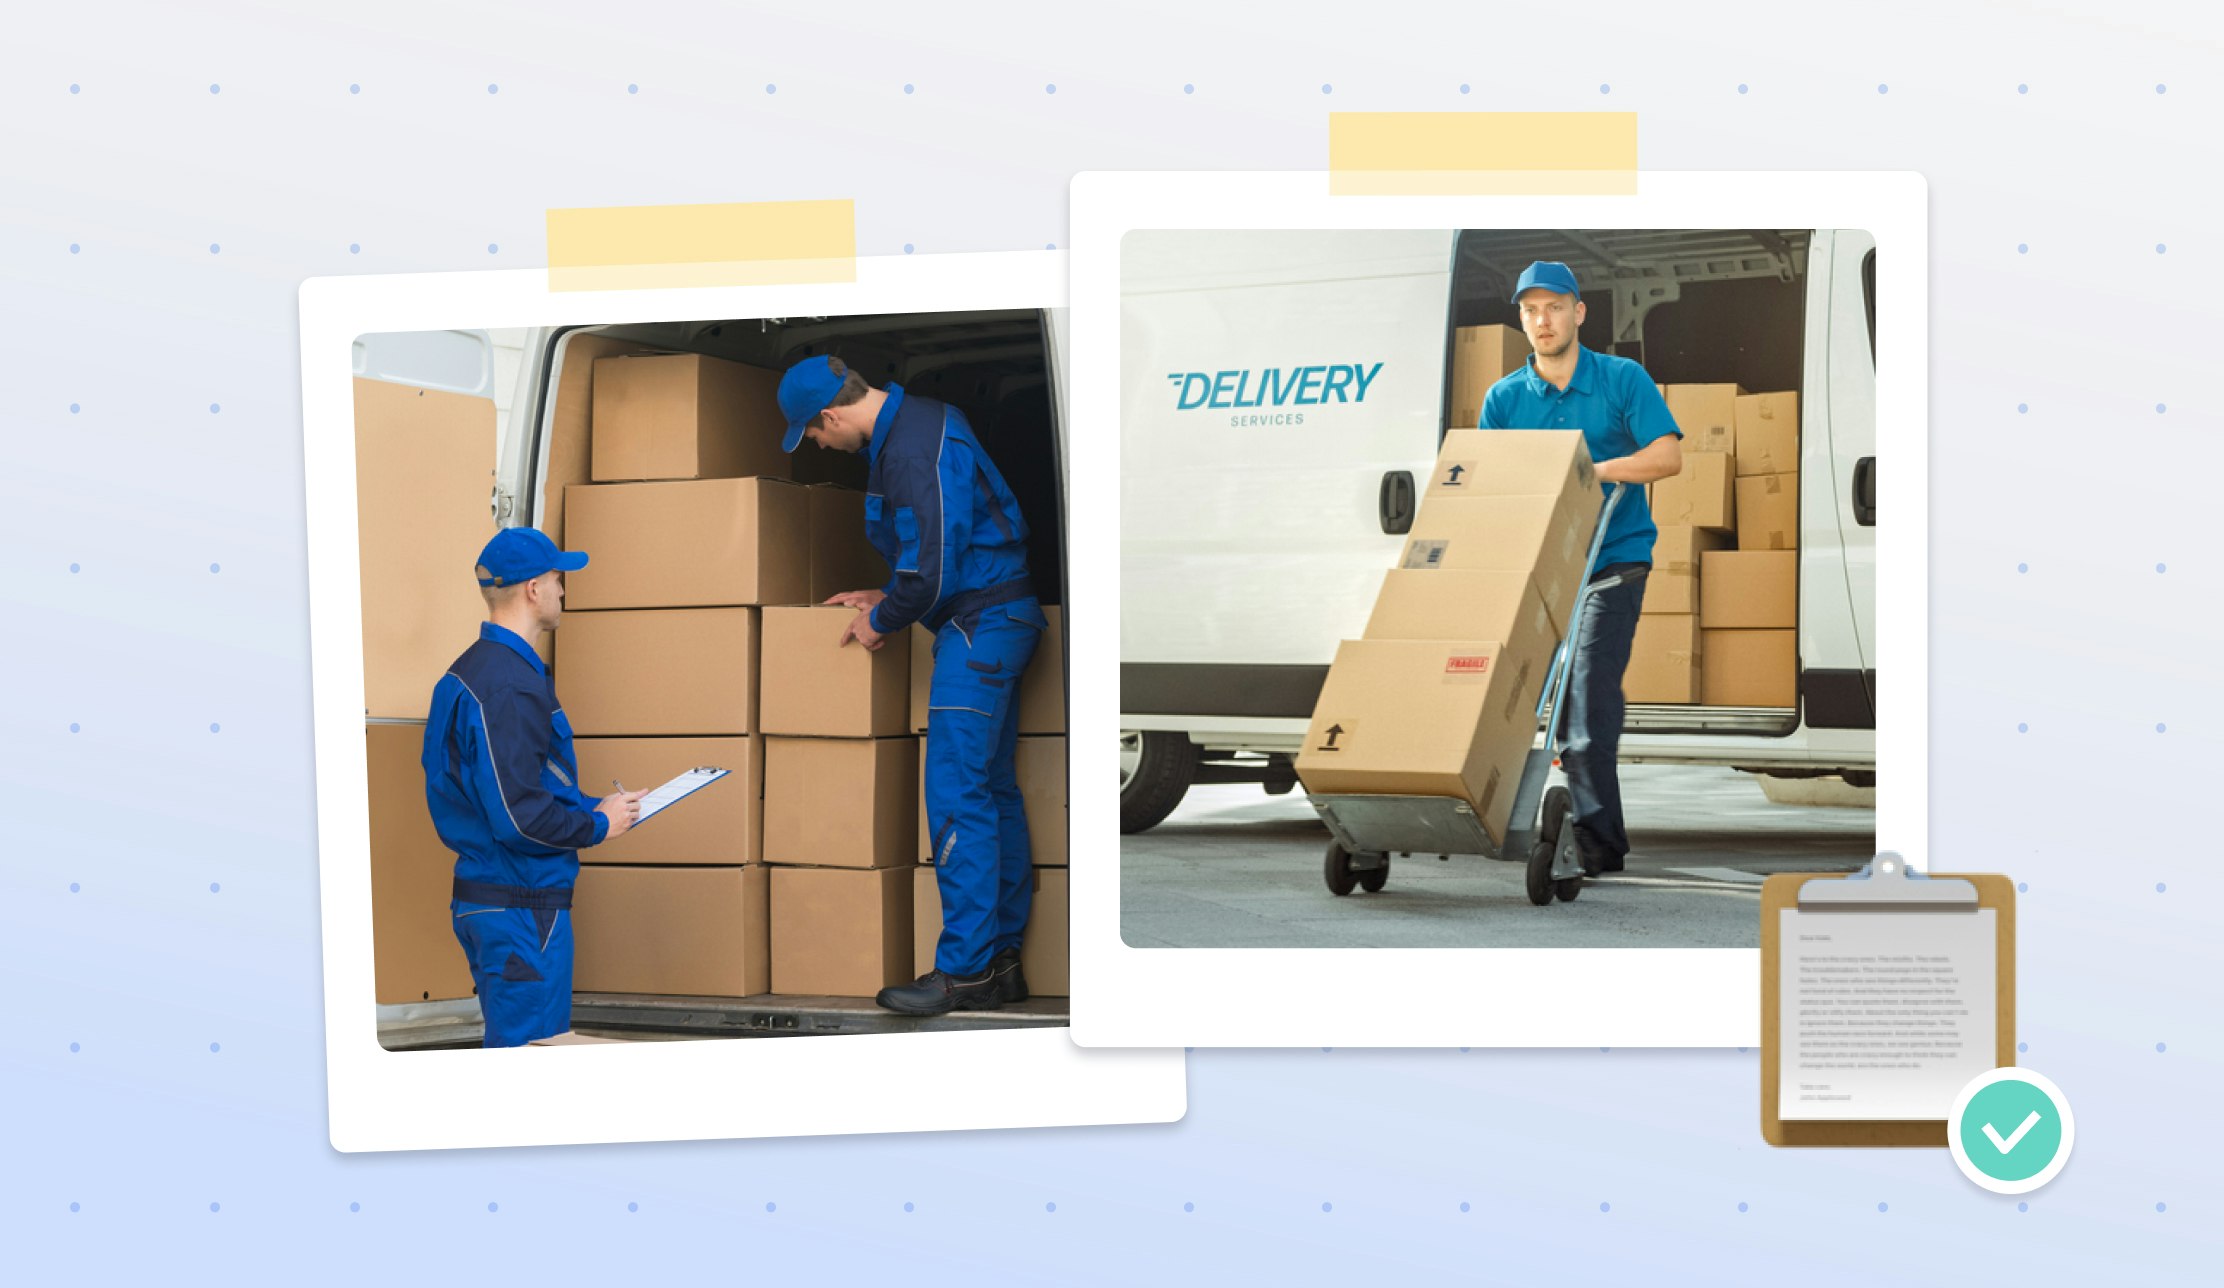 Two delivery drivers unloading cardboard boxes from the back of a white van. The delivery drivers are wearing blue uniforms and blue caps.